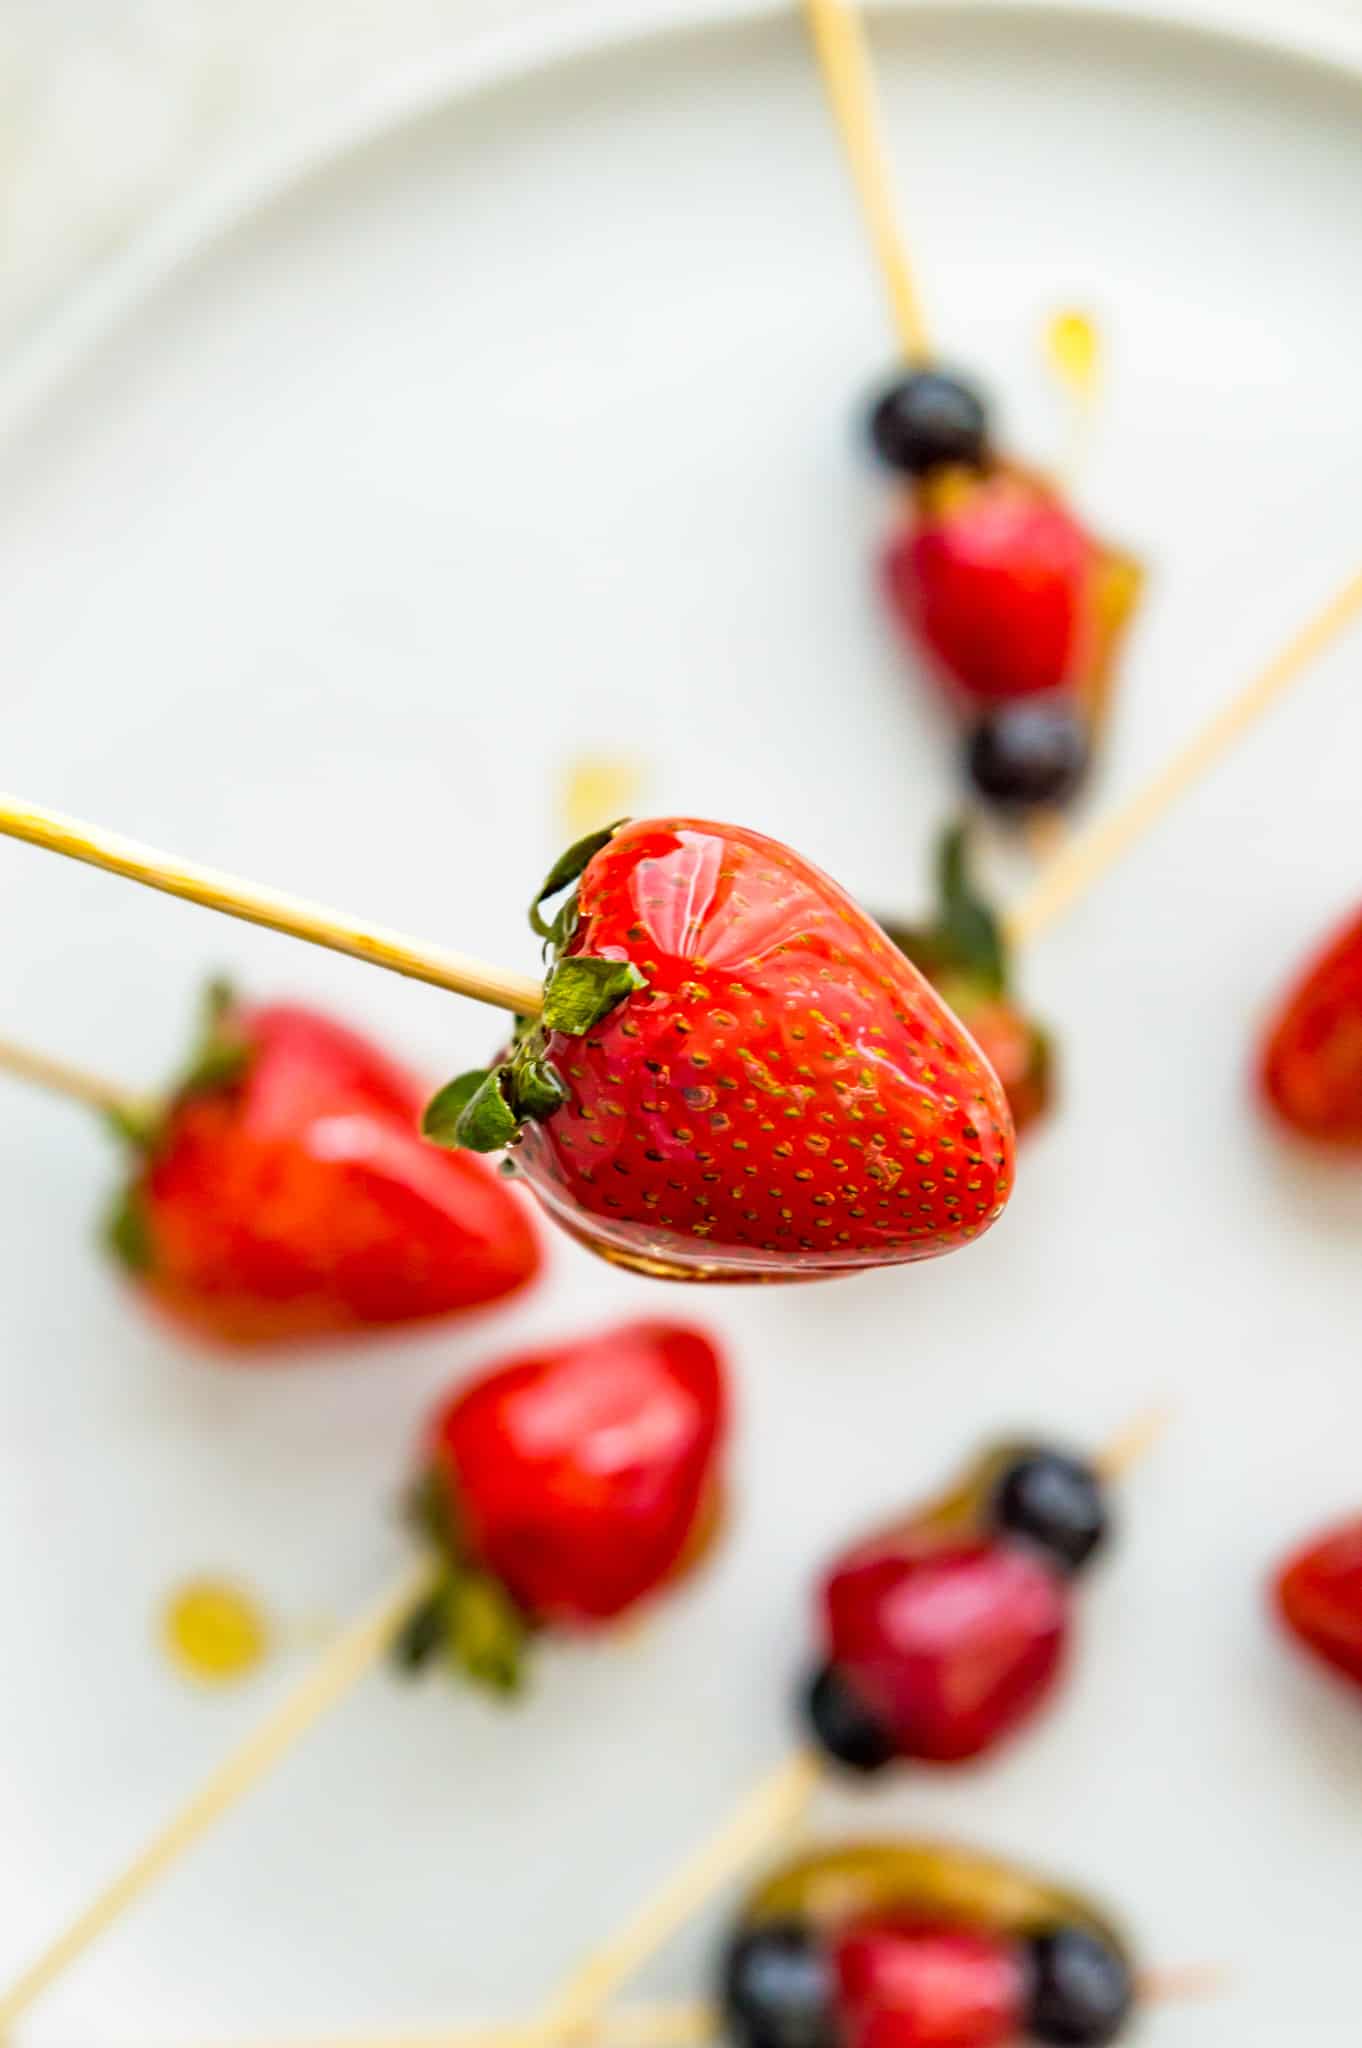 A Tanghulu strawberry on a bamboo skewer with a plate filled with candied strawberries below it.